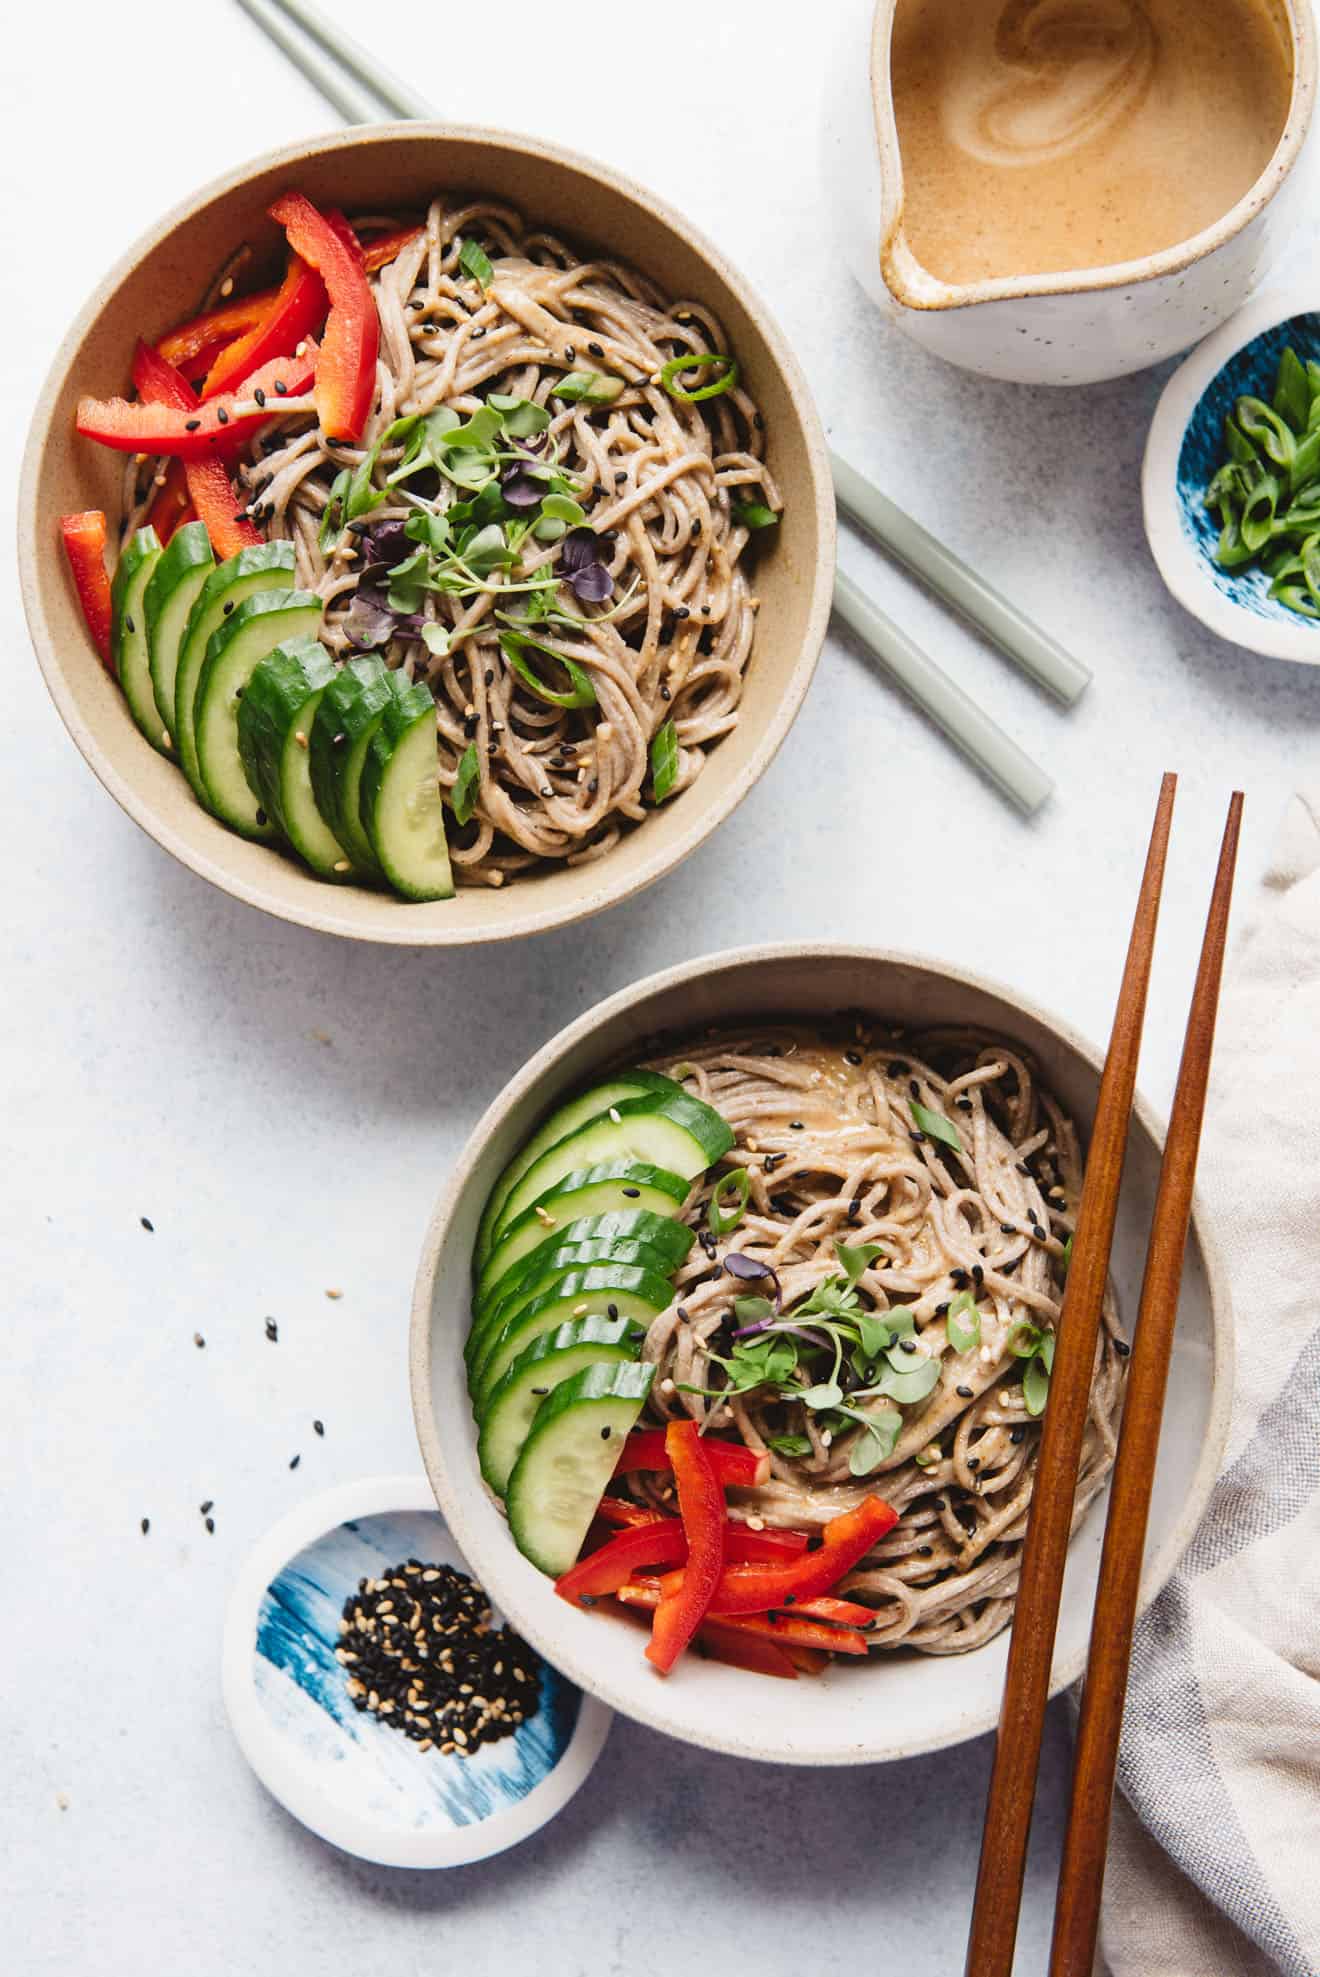 Cold Soba Noodles with Almond Butter Sauce (Vegan)